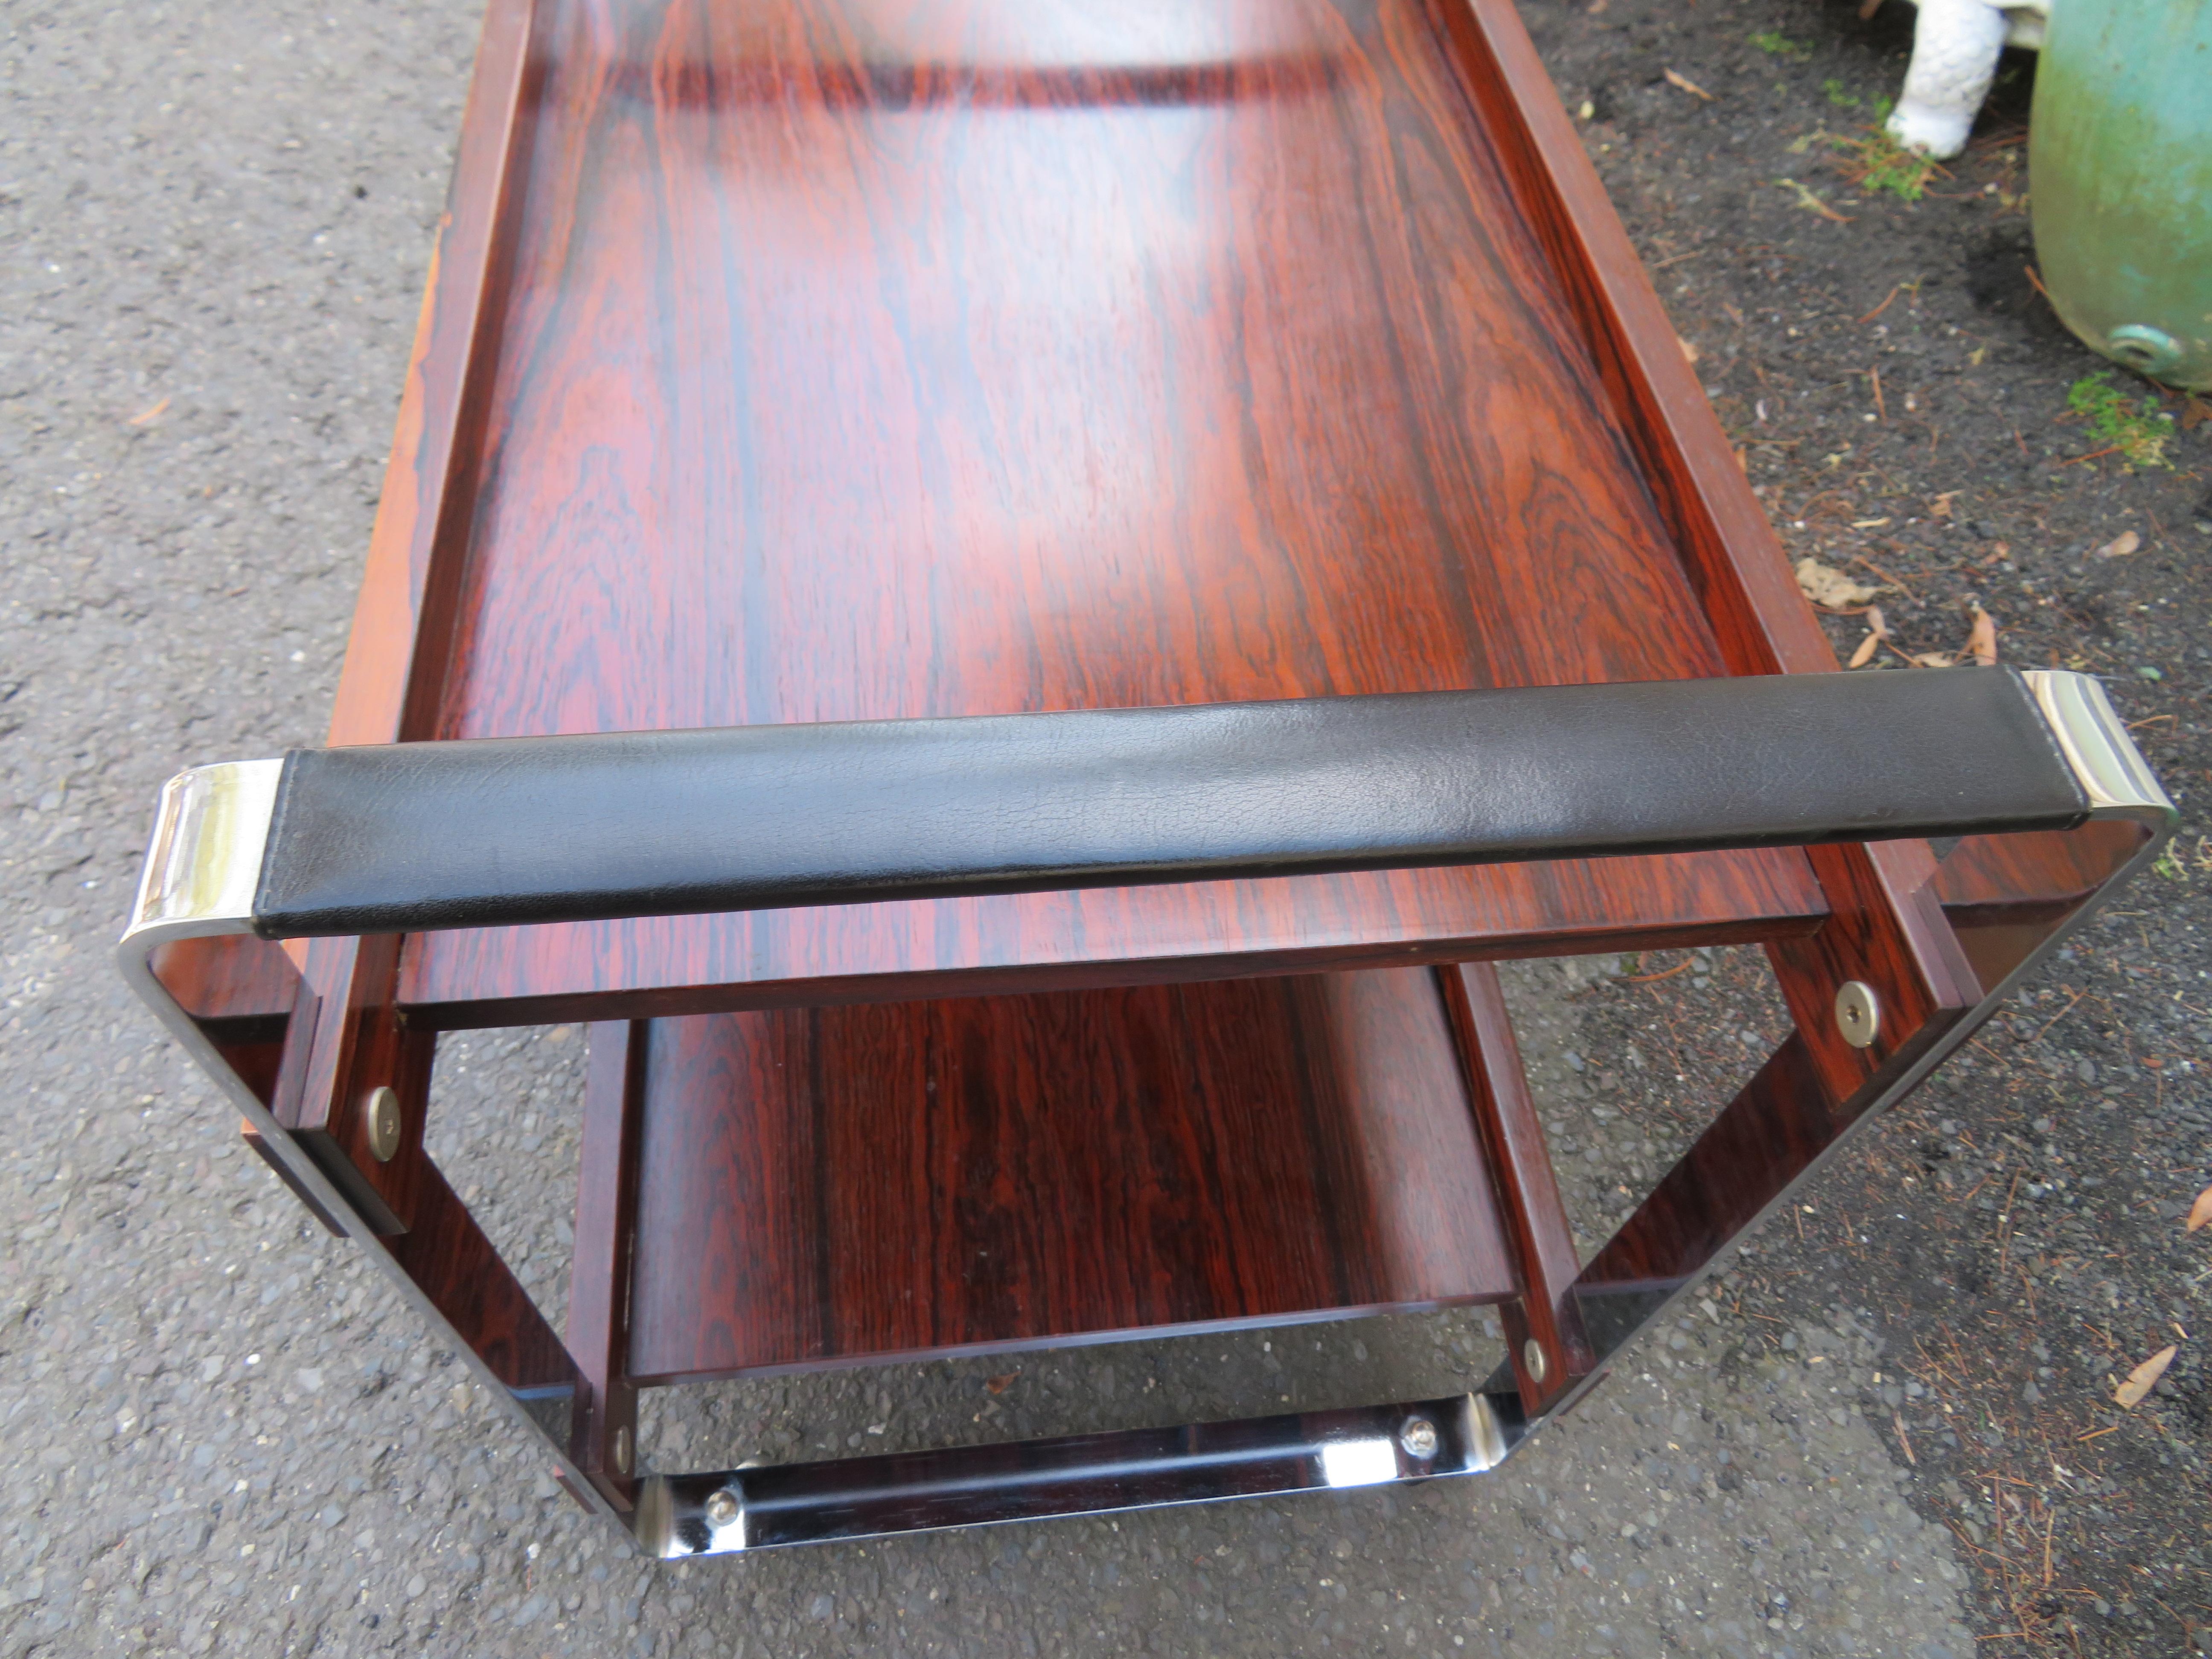 Stunning Rosewood and Chrome Rolling Bar Cart Richard Young Mid-Century Modern For Sale 4